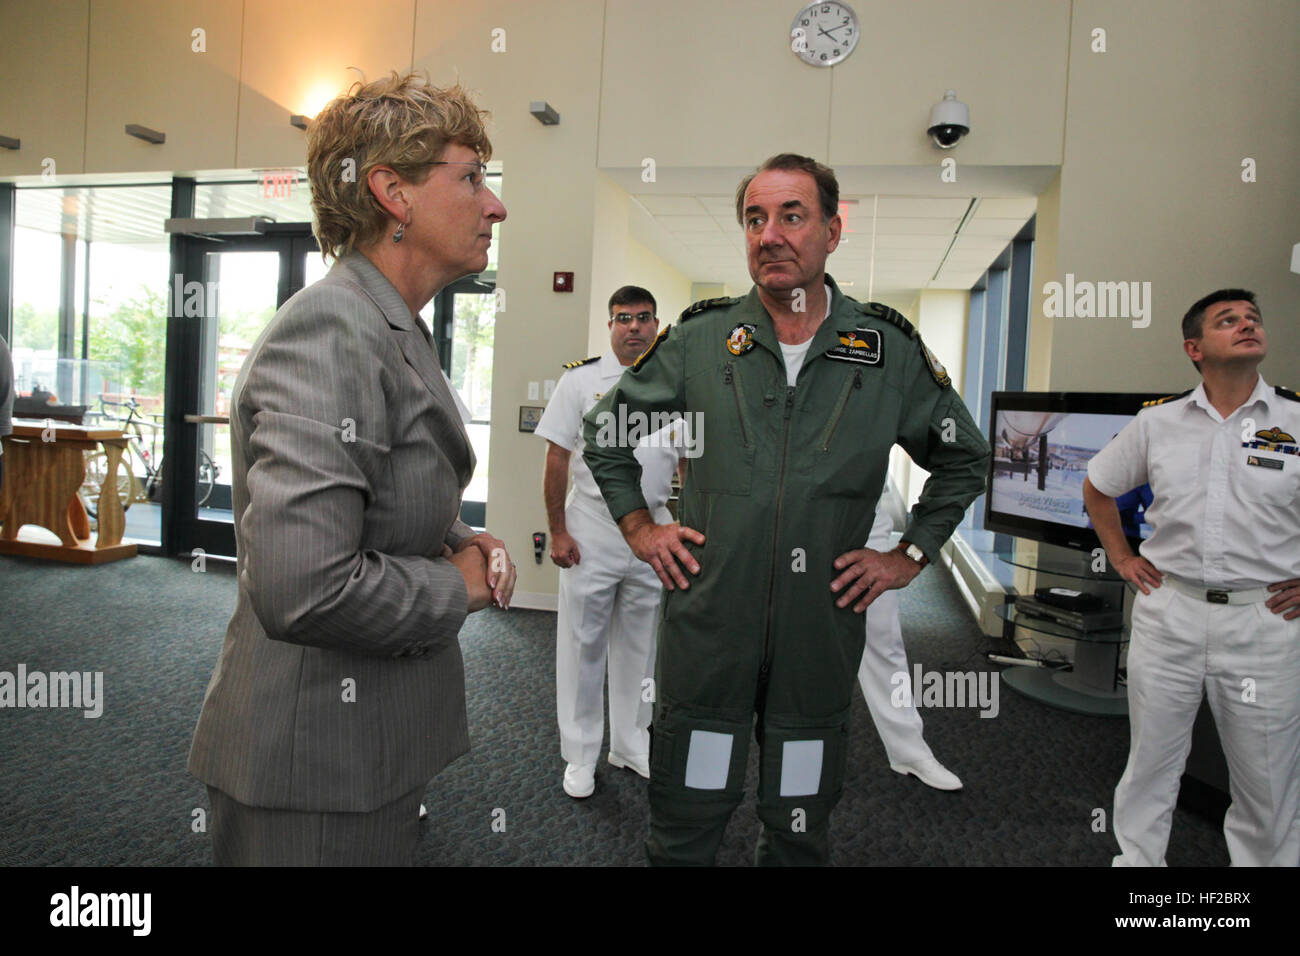 The First Sea Lord and Chief of Naval Staff of the British Royal Navy, Adm. Sir George Zambellas, center, receives a tour of the Missile Defense Agency by Laura DeSimone at Dahlgren, Va., July 29, 2014. Zambellas is taking part in the Commandant of the Marine Corps' Counterpart Program, which invites foreign military leaders to visit the United States and interact with U.S. military leaders. (U.S. Marine Corps photo by Cpl. Michael C. Guinto/Released) First Sea Lord Counterpart Visit 140729-M-LI307-465 Stock Photo